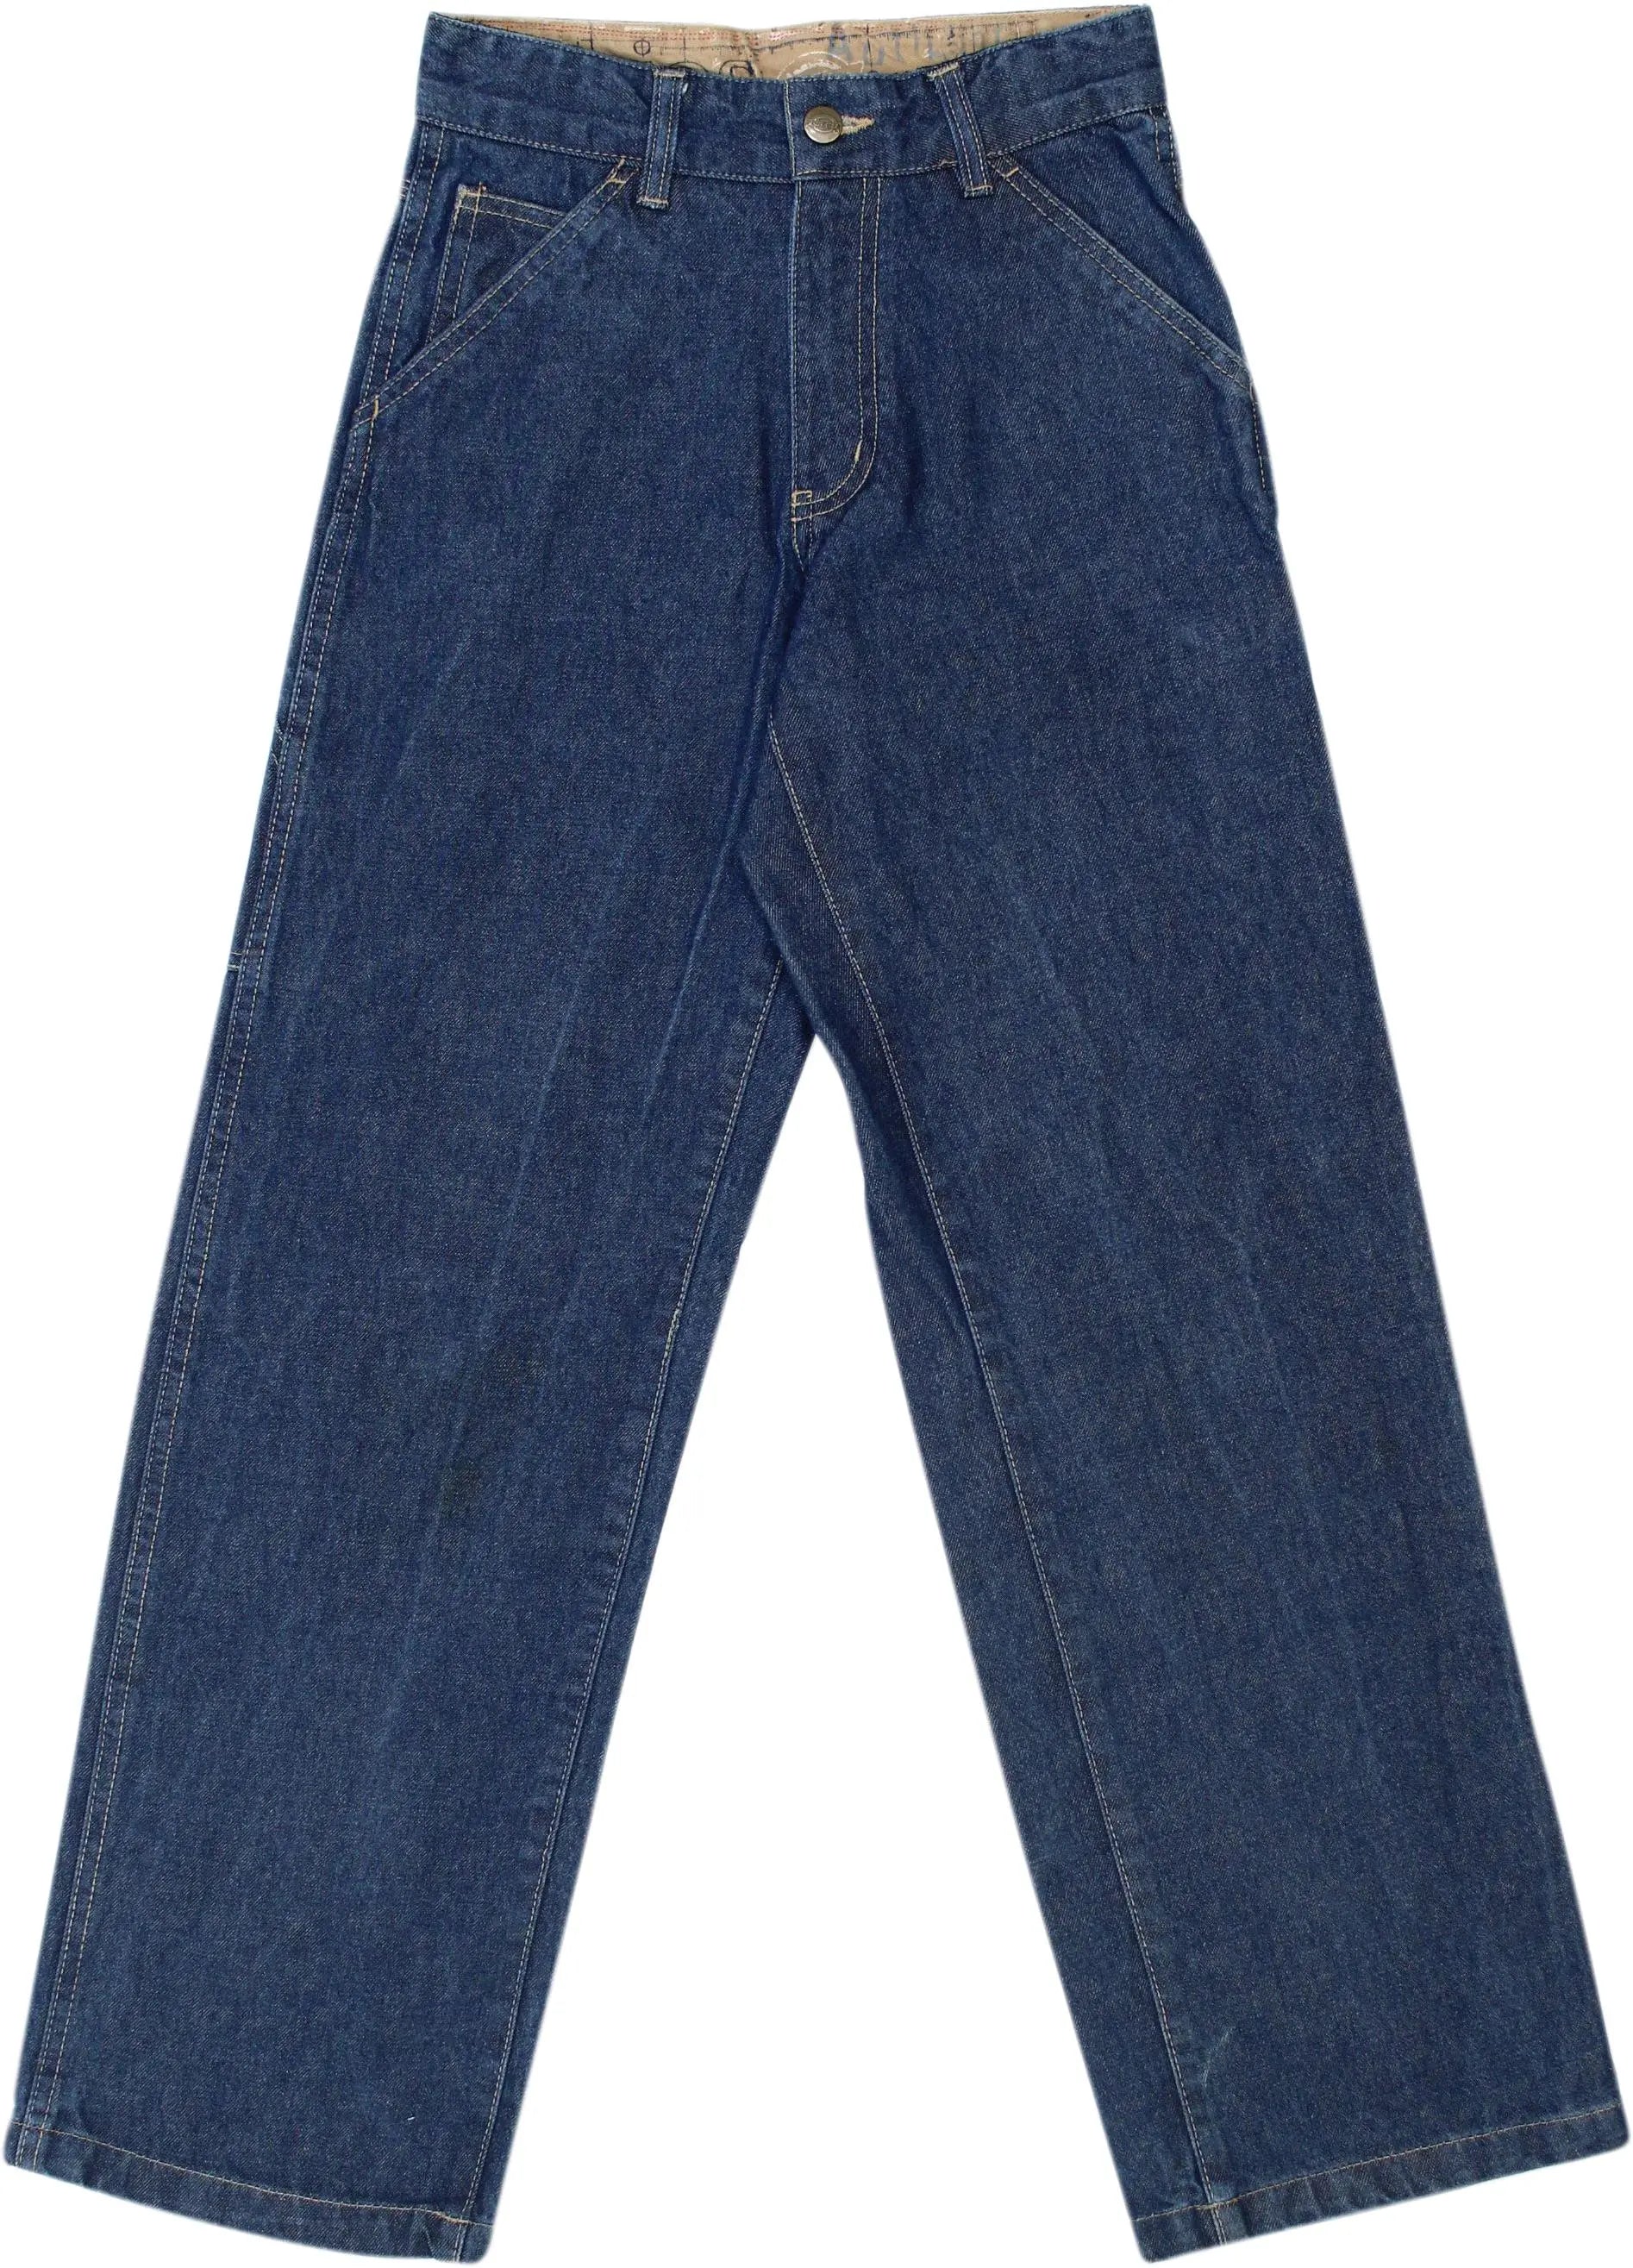 Dickies - Blue Jeans by Dickies- ThriftTale.com - Vintage and second handclothing